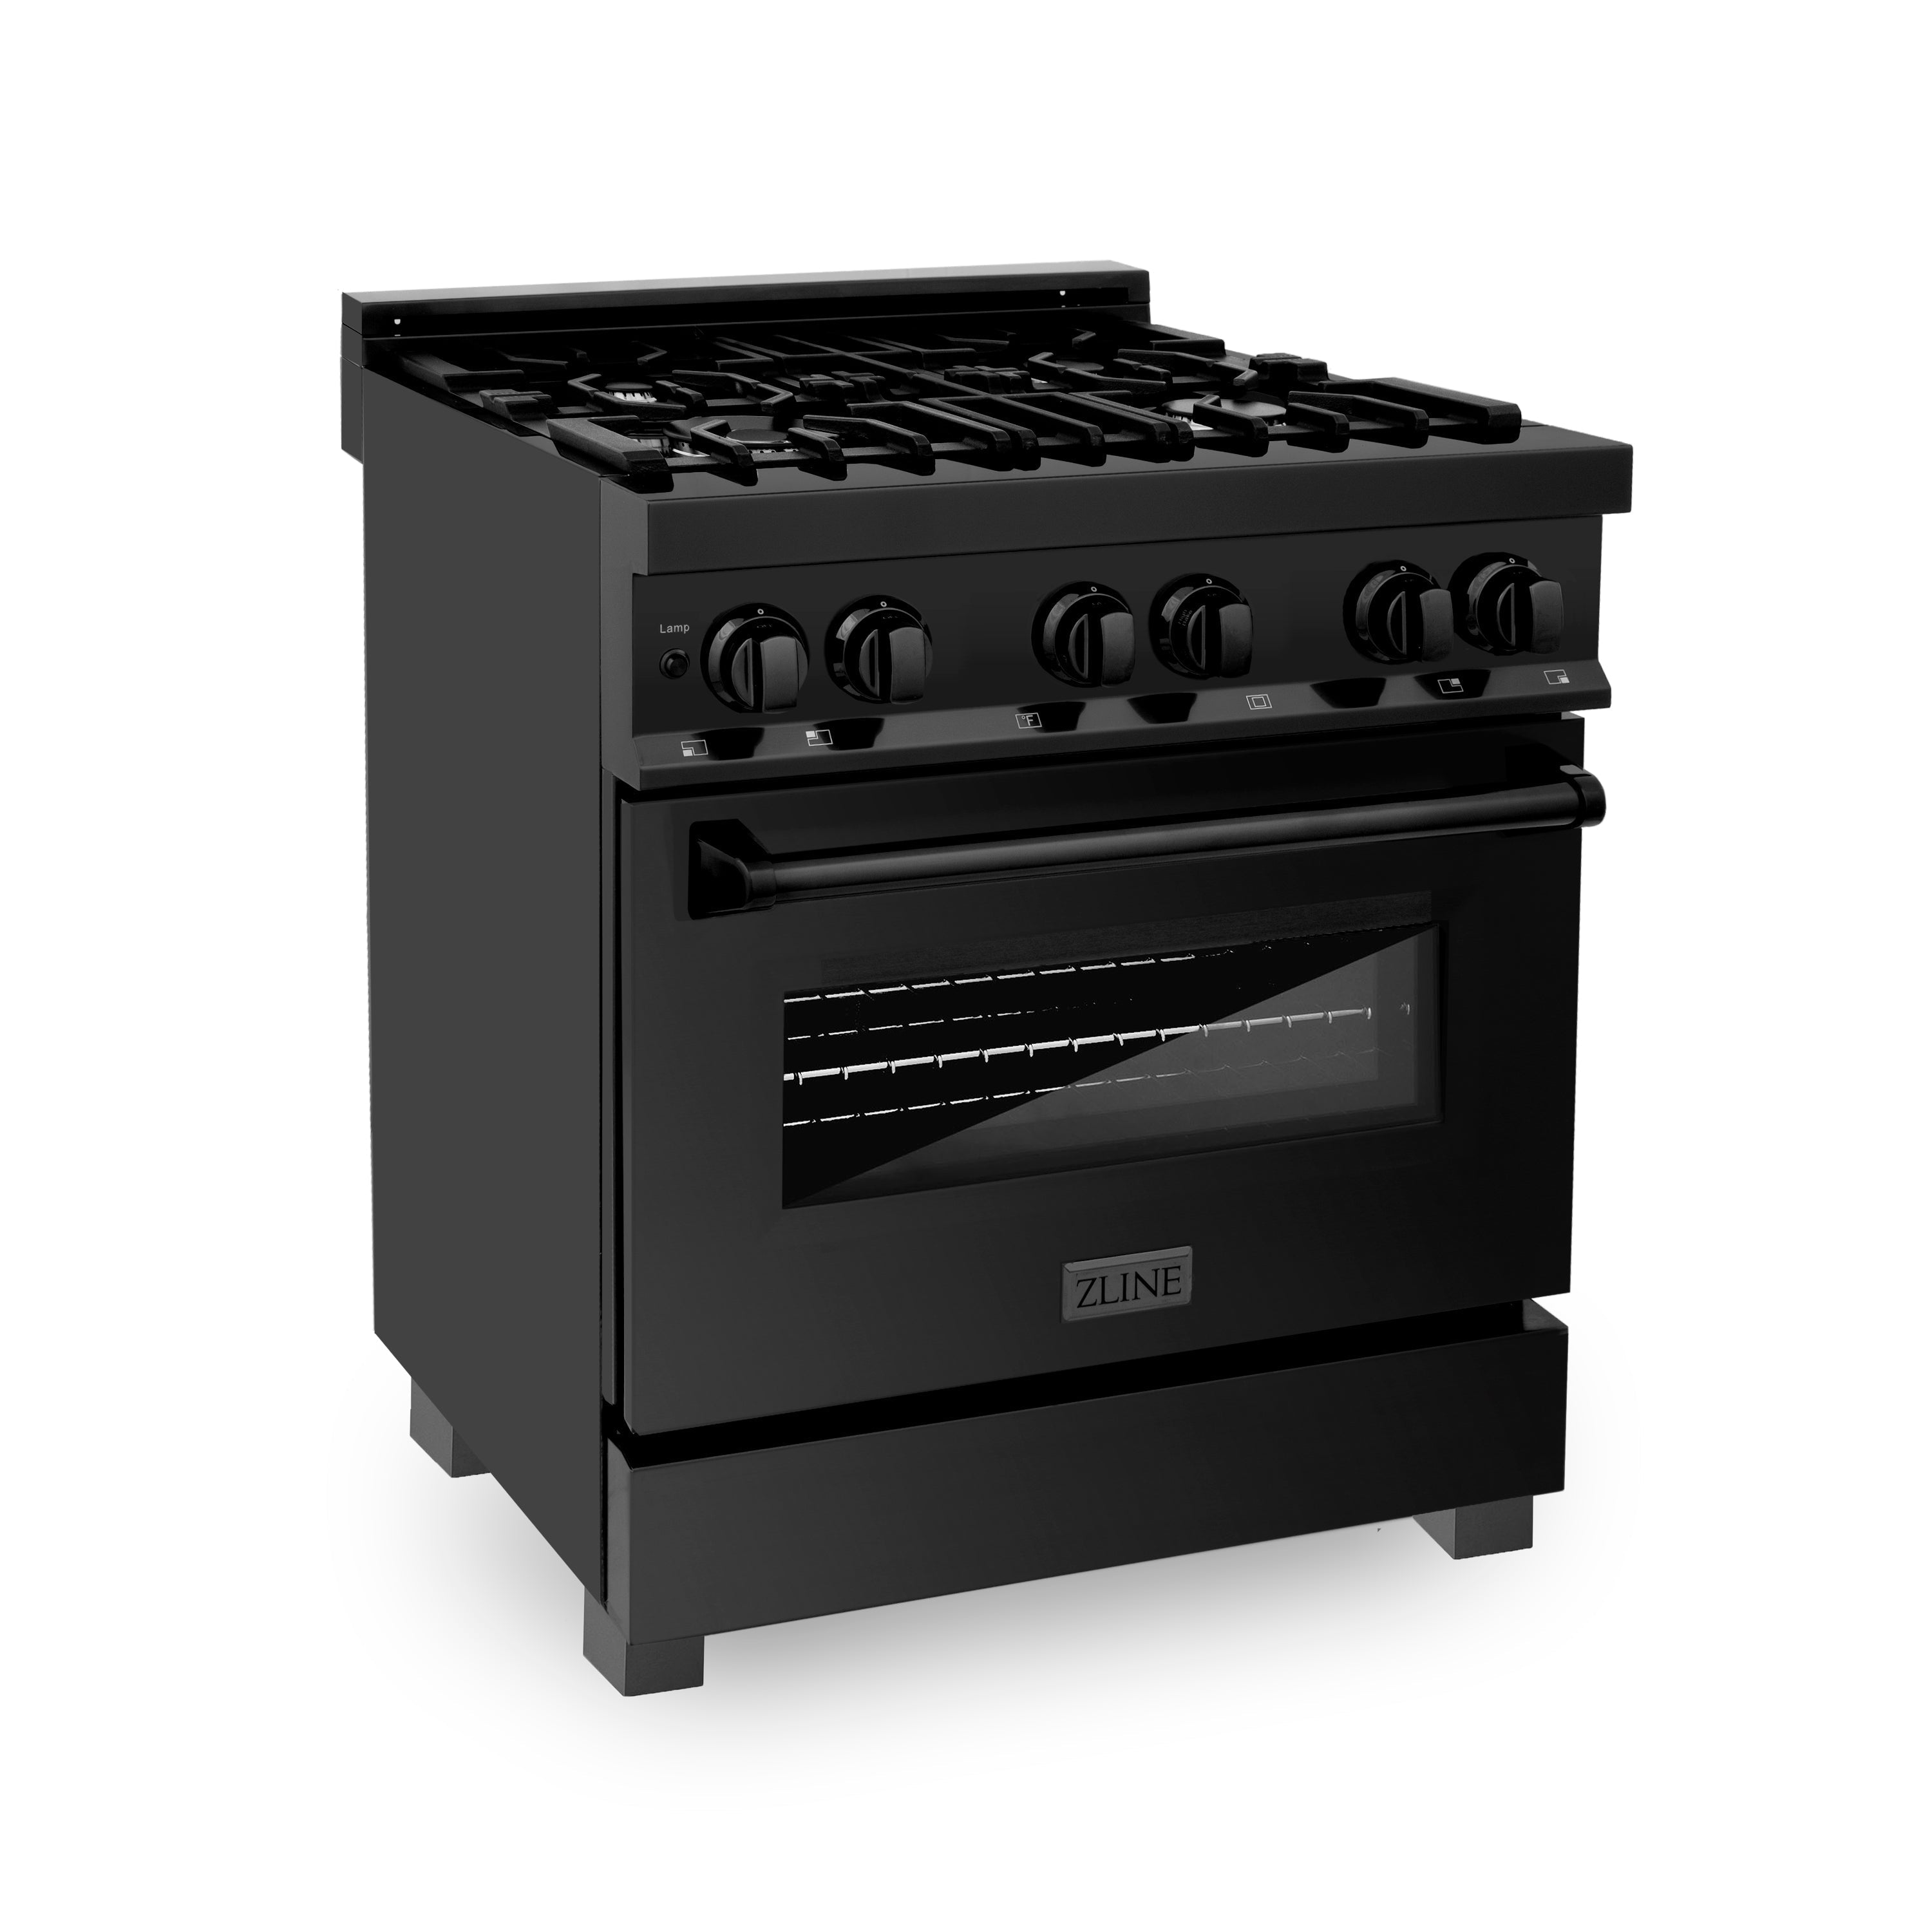 ZLINE 30" 4.0 cu. ft. Dual Fuel Range with Gas Stove and Electric Oven in Black Stainless Steel (RAB-30)